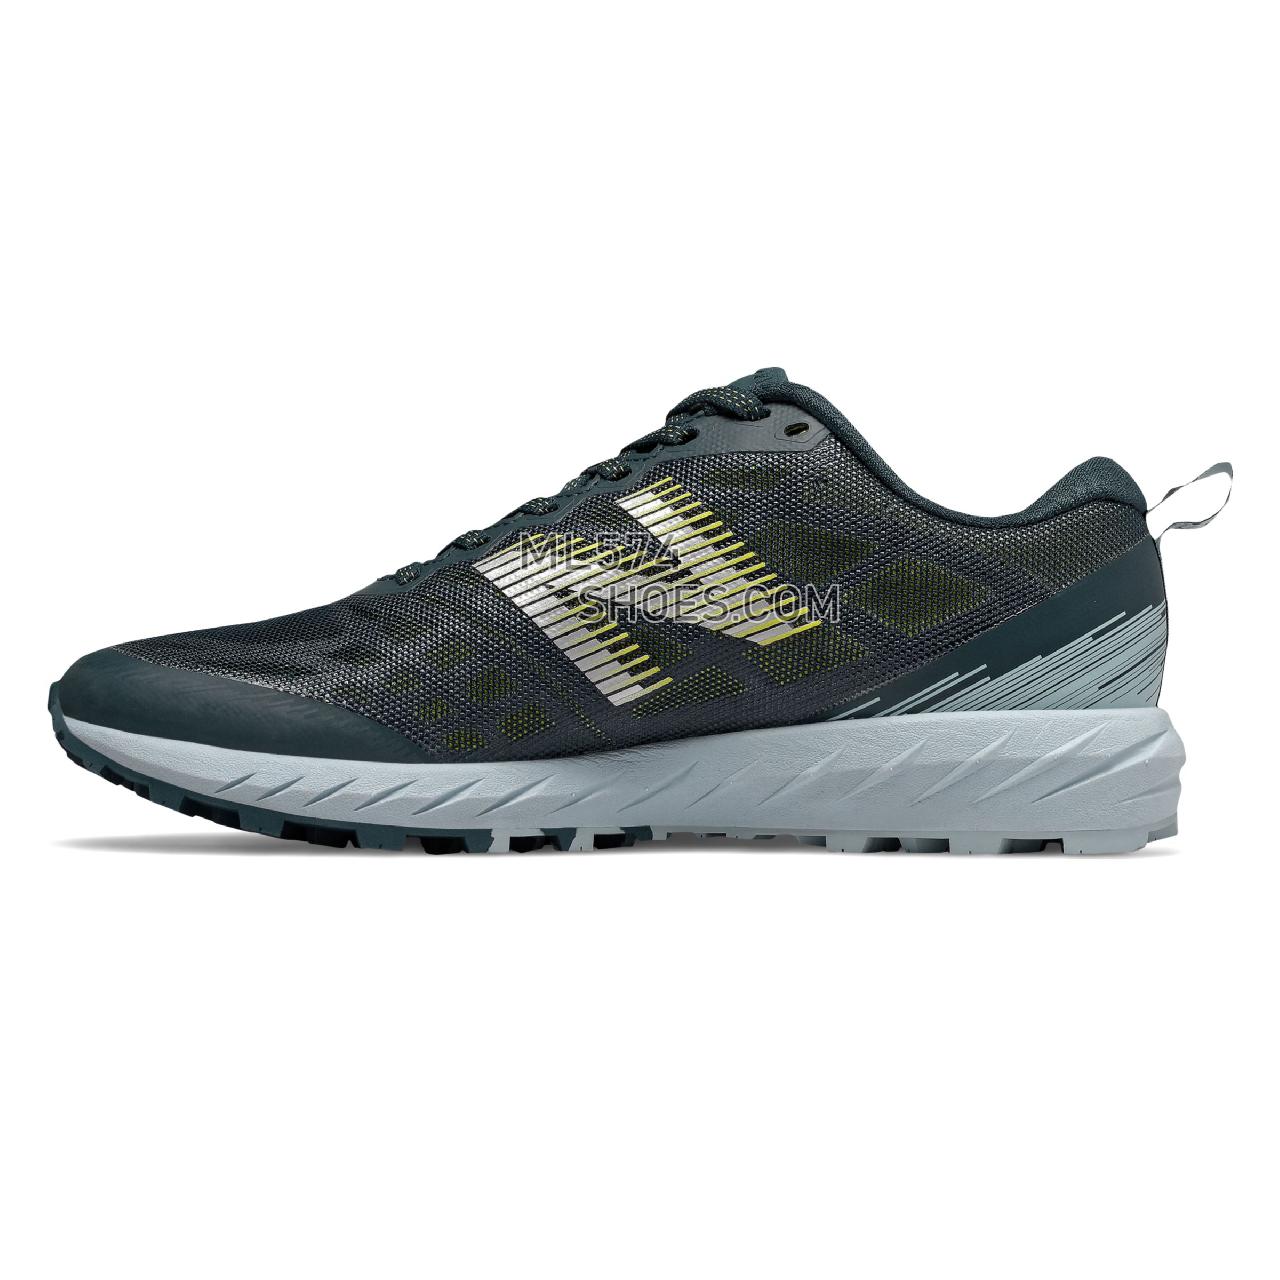 New Balance Summit Unknown GTX - Women's Trail Running - Supercell with Winter Sky and Sulphur Yellow - WTUNKNGT